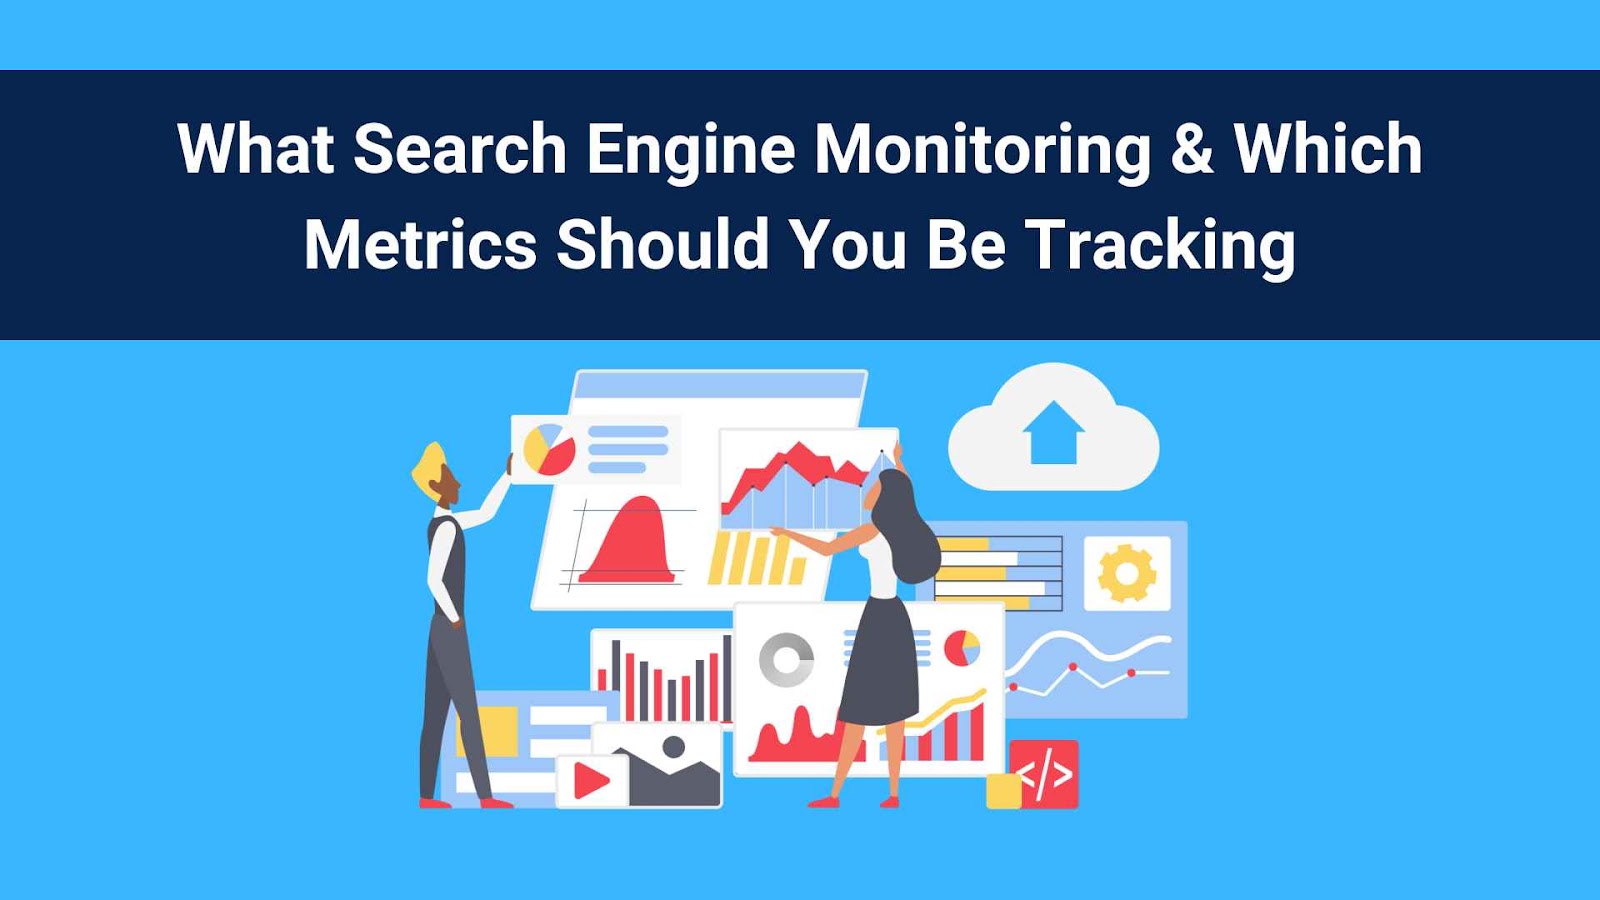 Illustration of search engine monitoring tools and metrics.